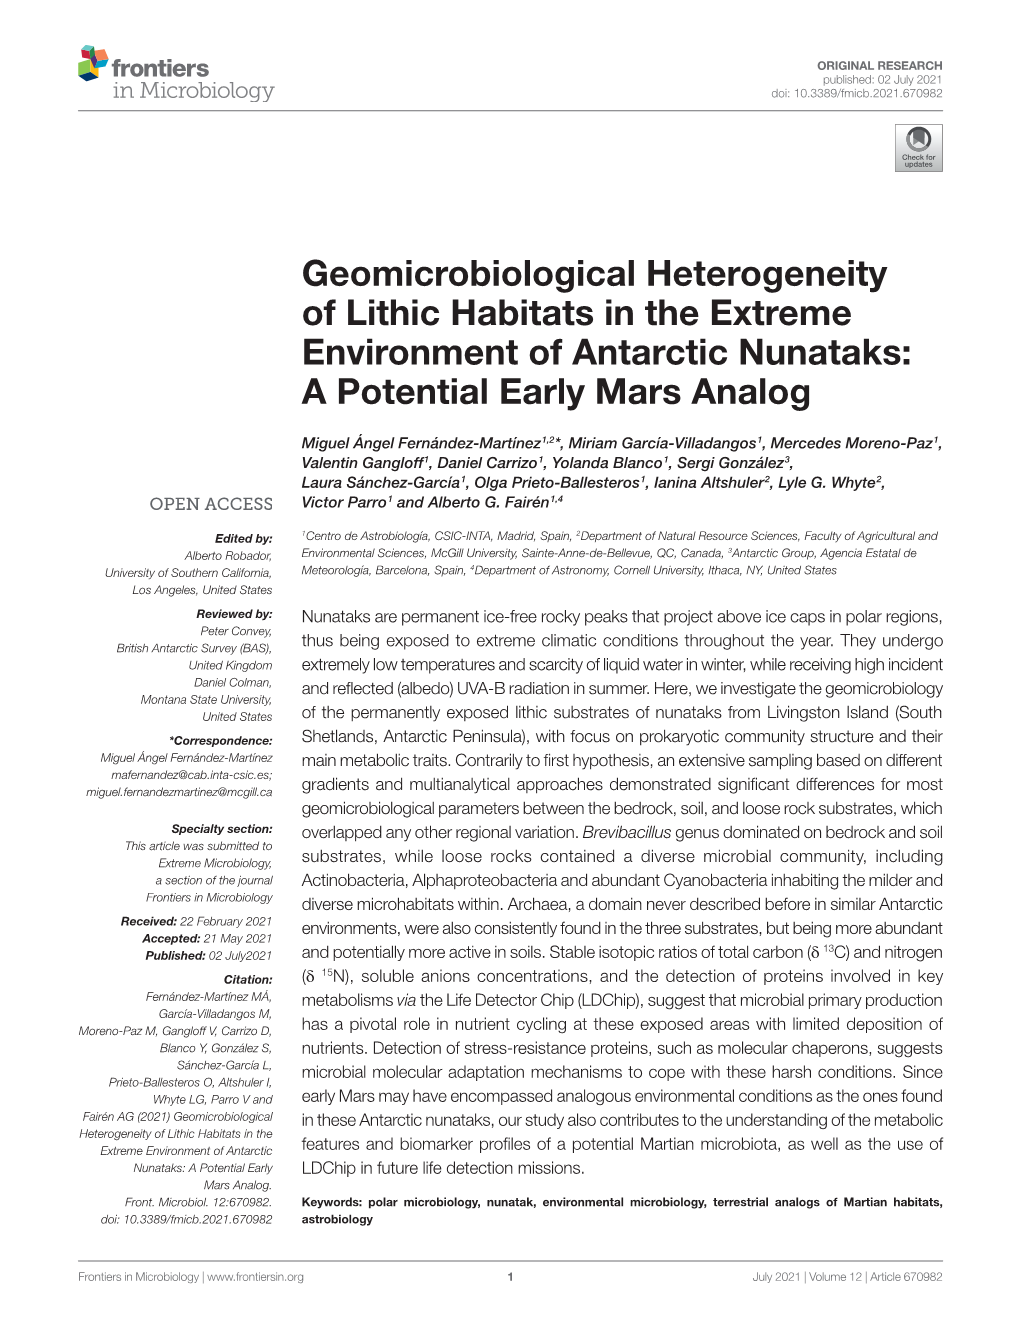 Geomicrobiological Heterogeneity of Lithic Habitats in the Extreme Environment of Antarctic Nunataks: a Potential Early Mars Analog